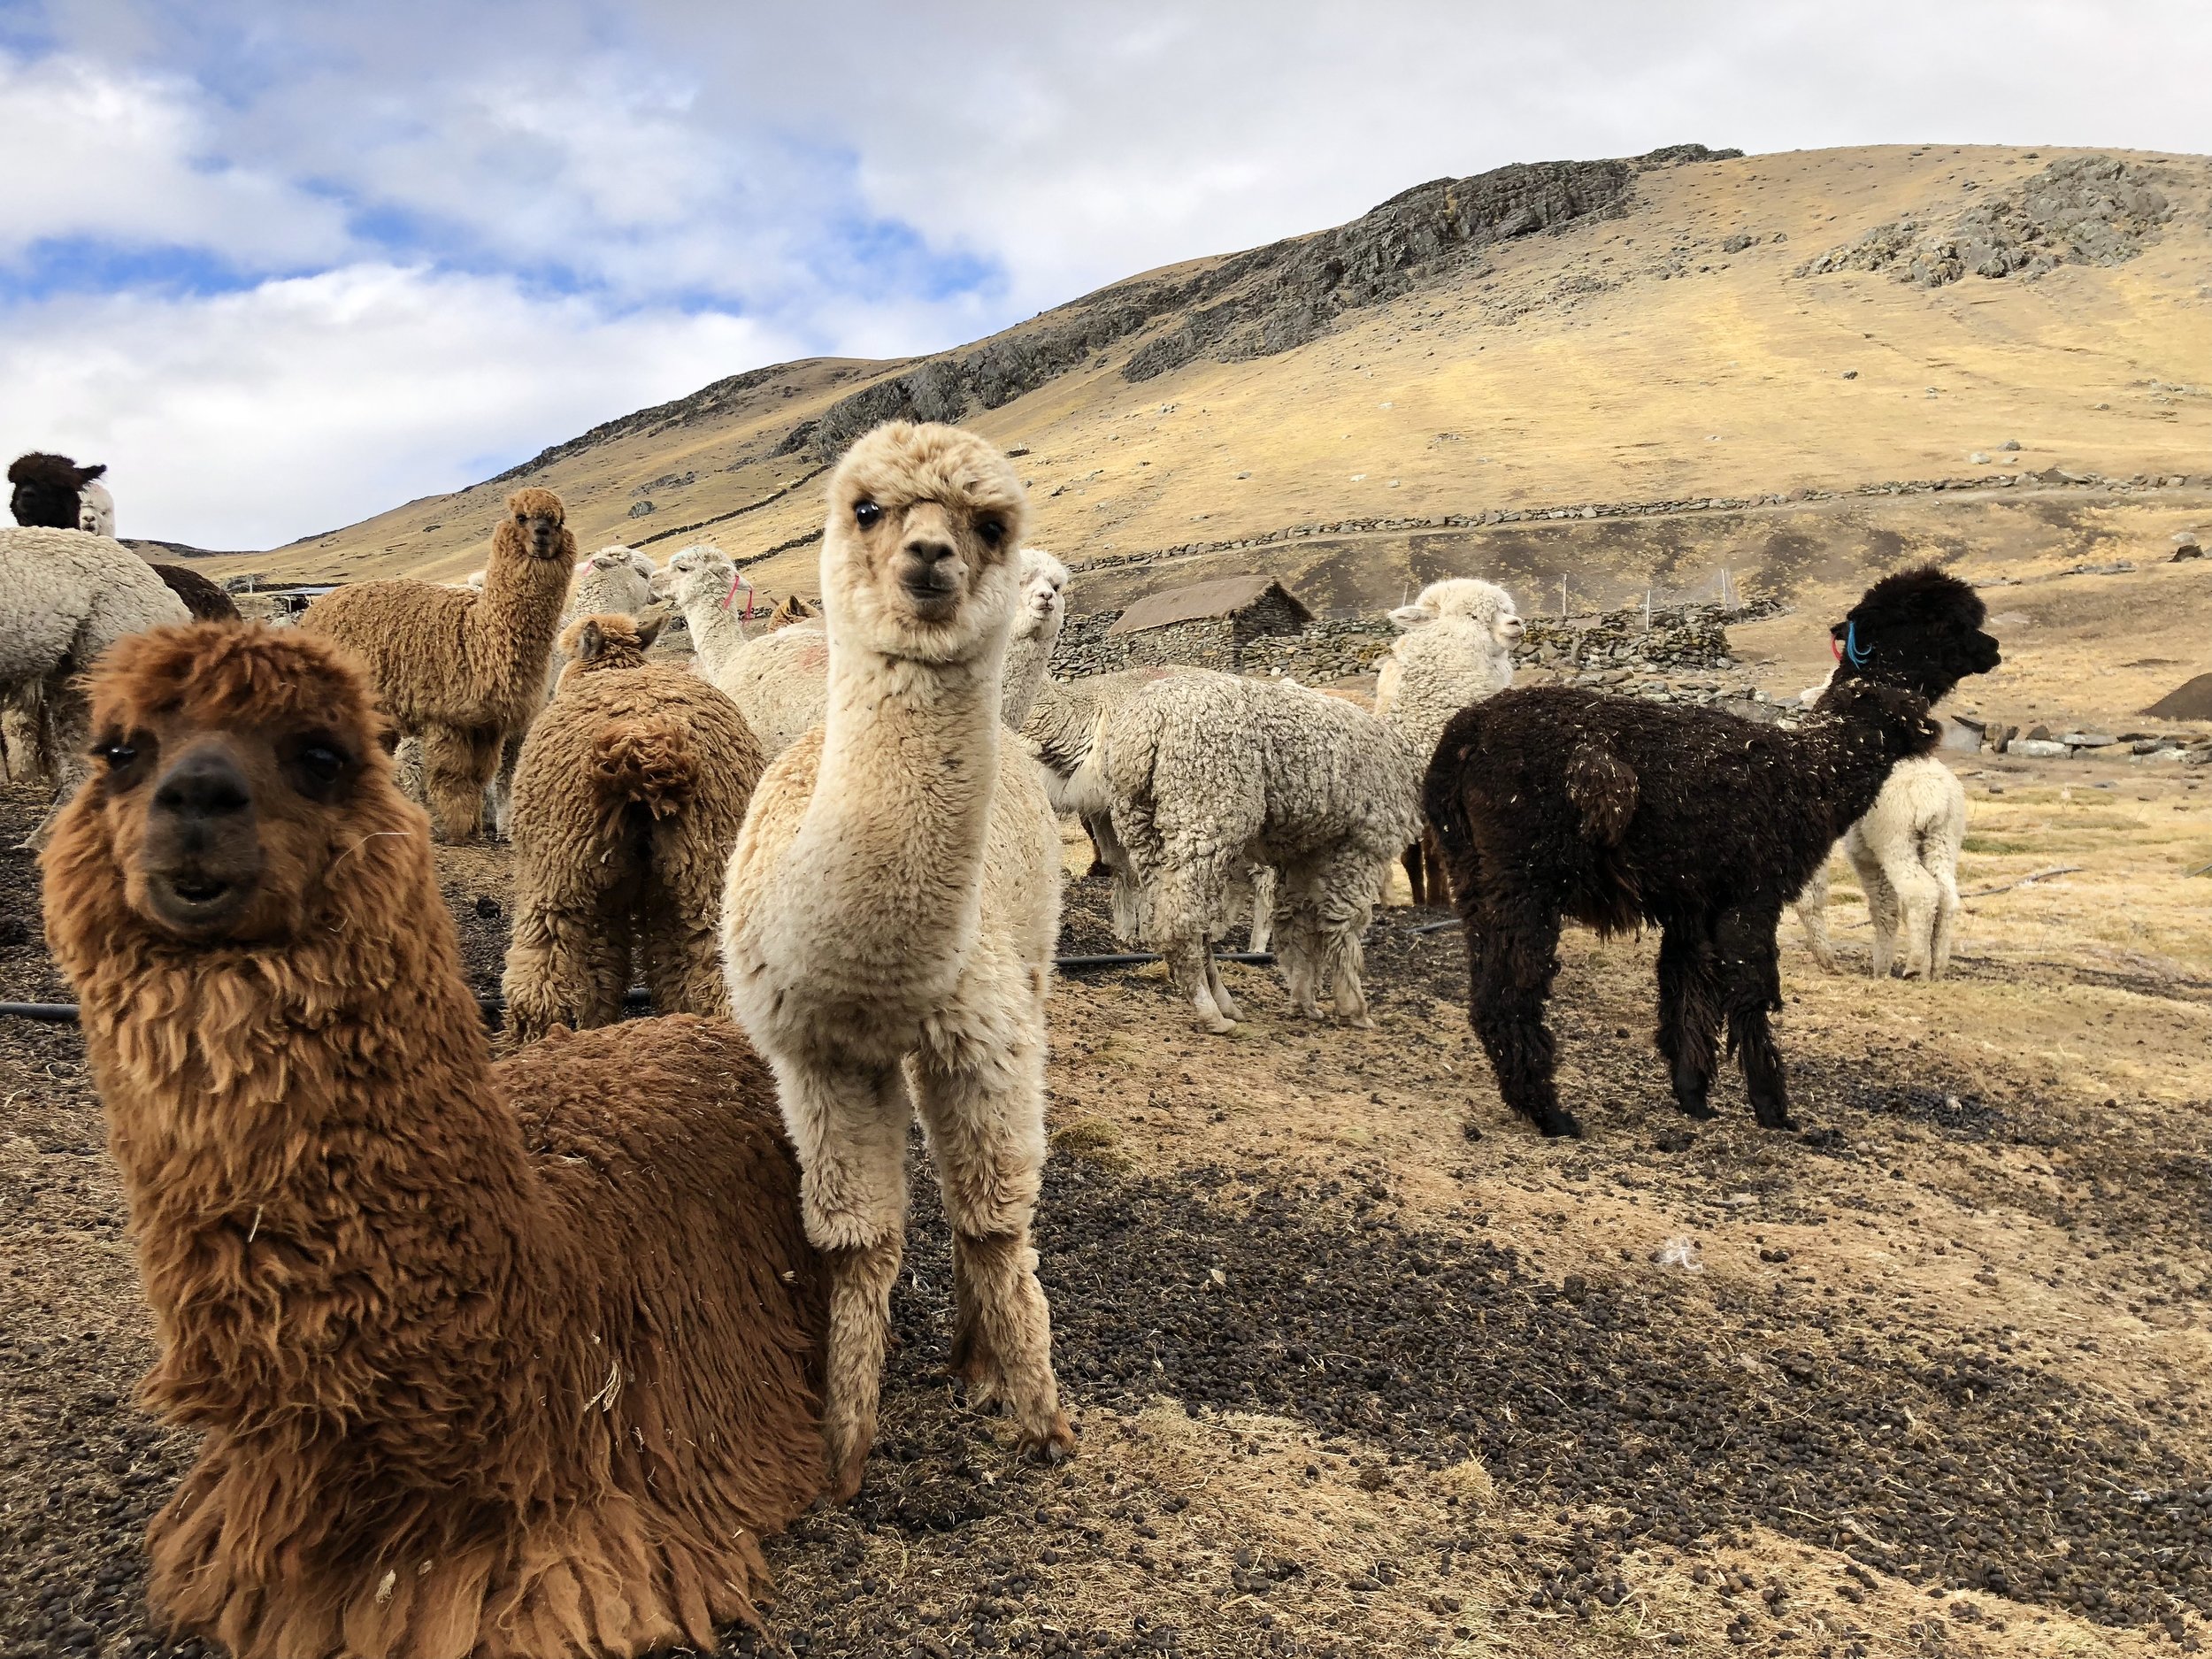 Alpaca does not contain lanolin, making it hypoallergenic and excellent for those with skin sensitivities.